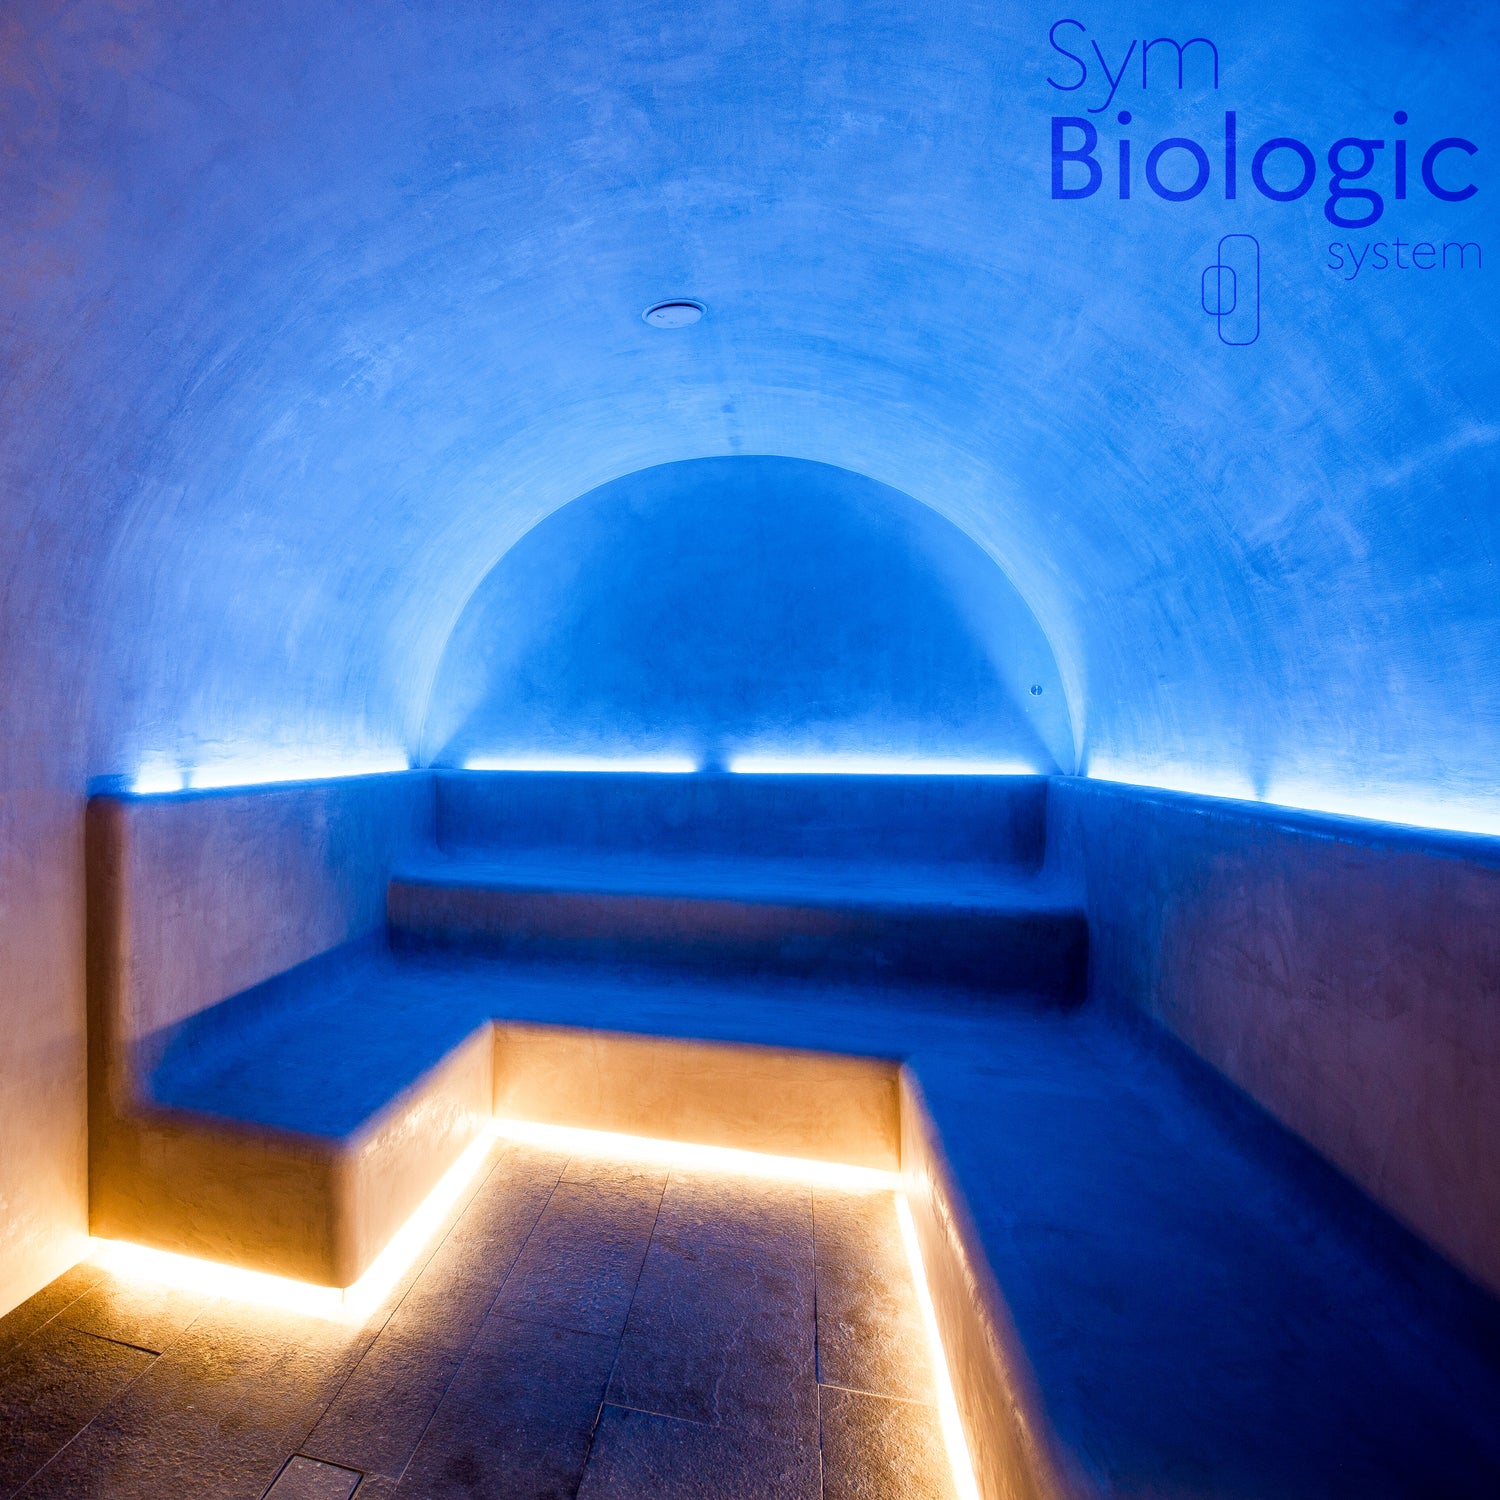 Image showcasing a spa salt cave, where walls of natural salt crystals create a unique and therapeutic environment for relaxation and health benefits.